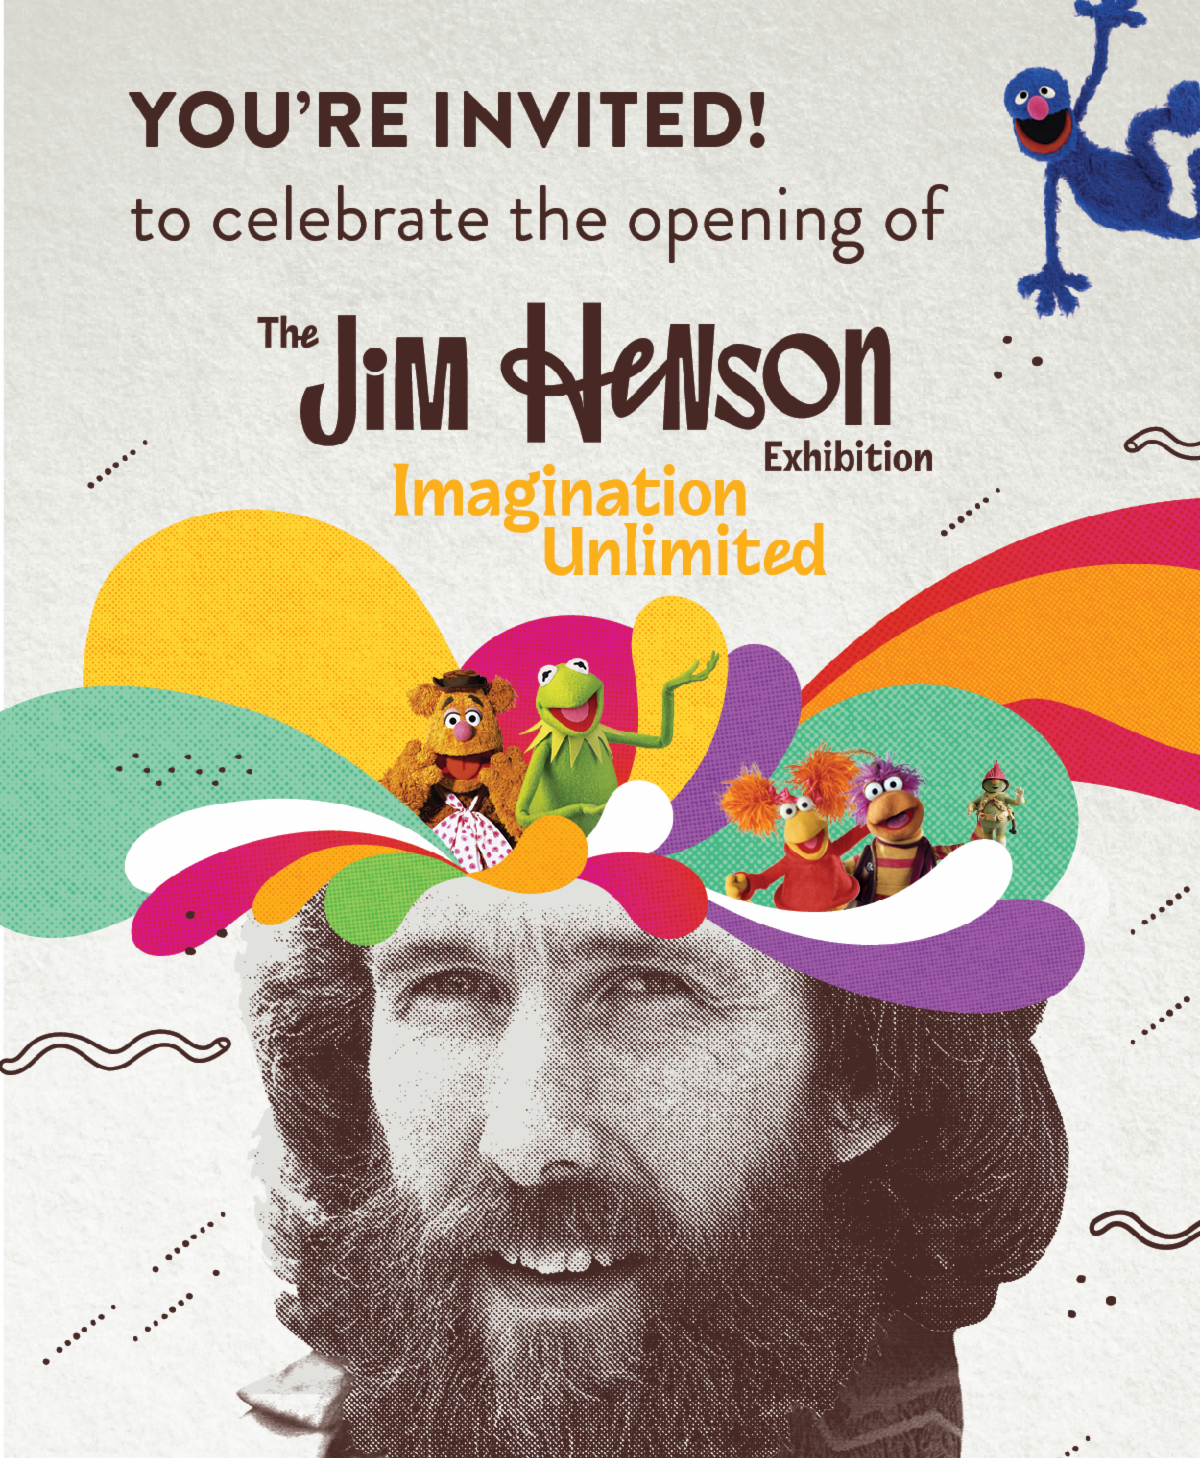 You're invited to celebrate the opening of The Jim Henson Exhibition: Imagination Unlimited